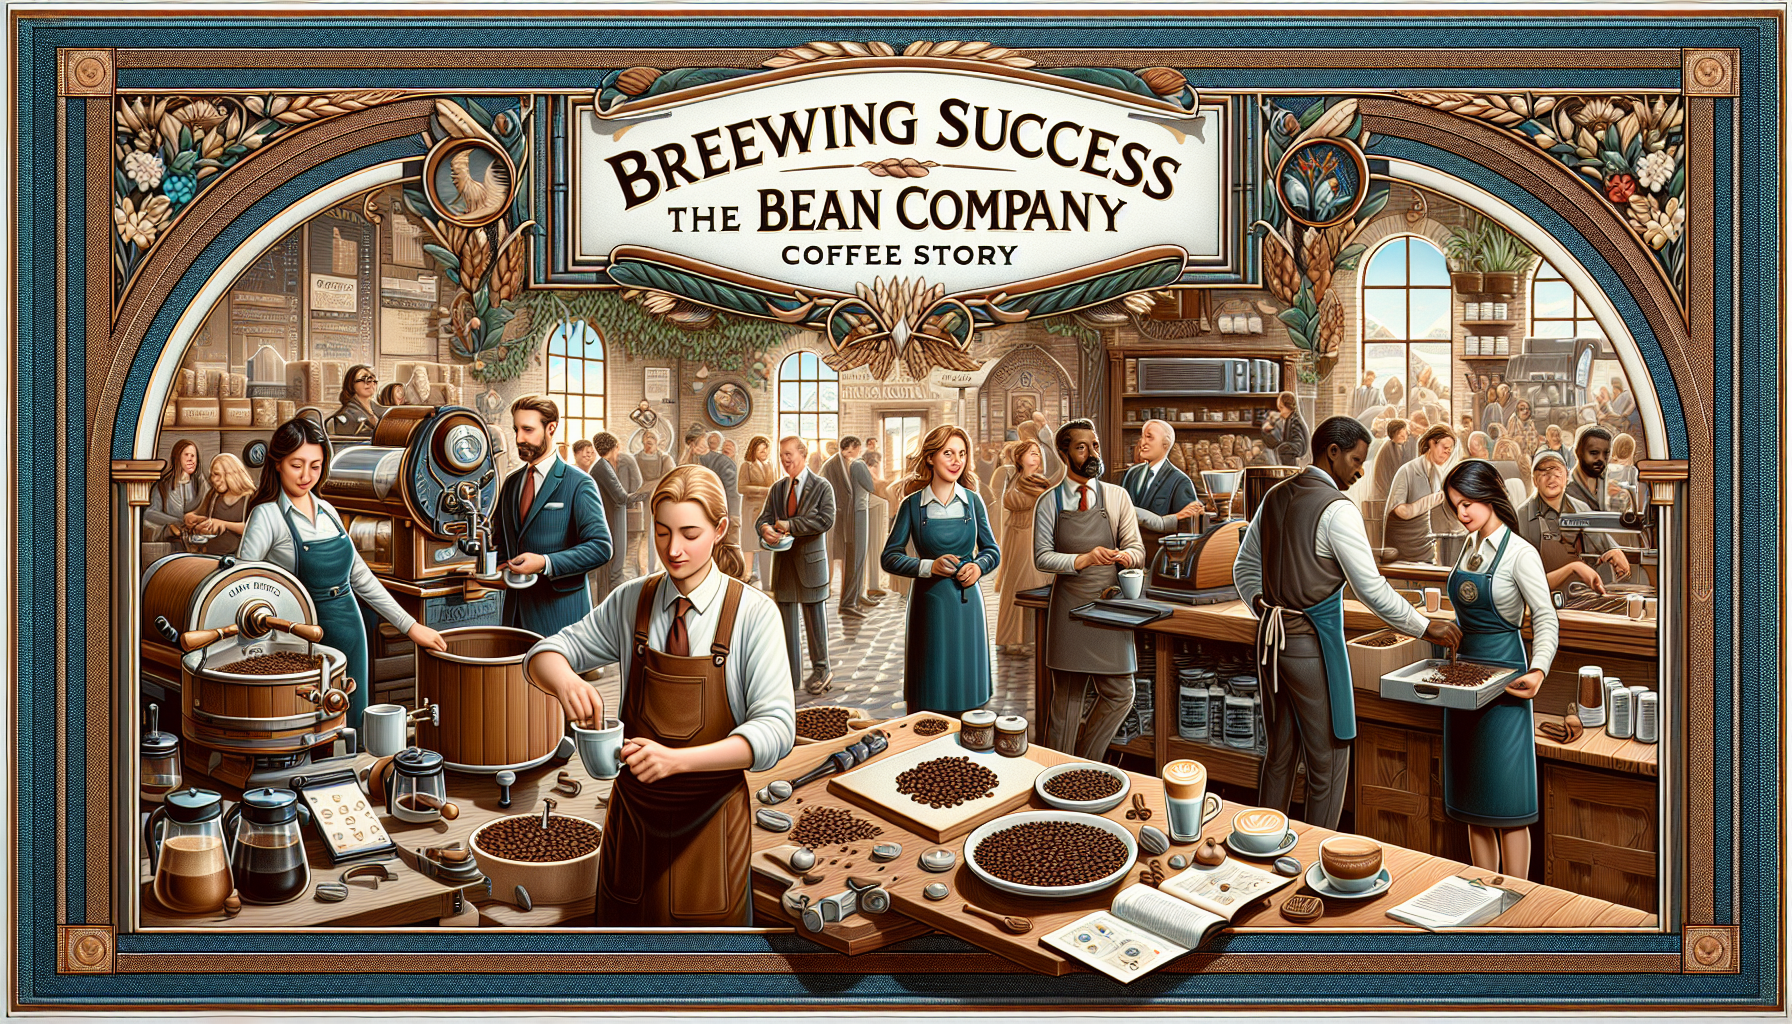 A detailed scene depicting the story of a coffee company journey named 'The Bean Company'. In the foreground, a variety of workers, including a Caucasian male roasting the coffee beans, a Middle-Easte